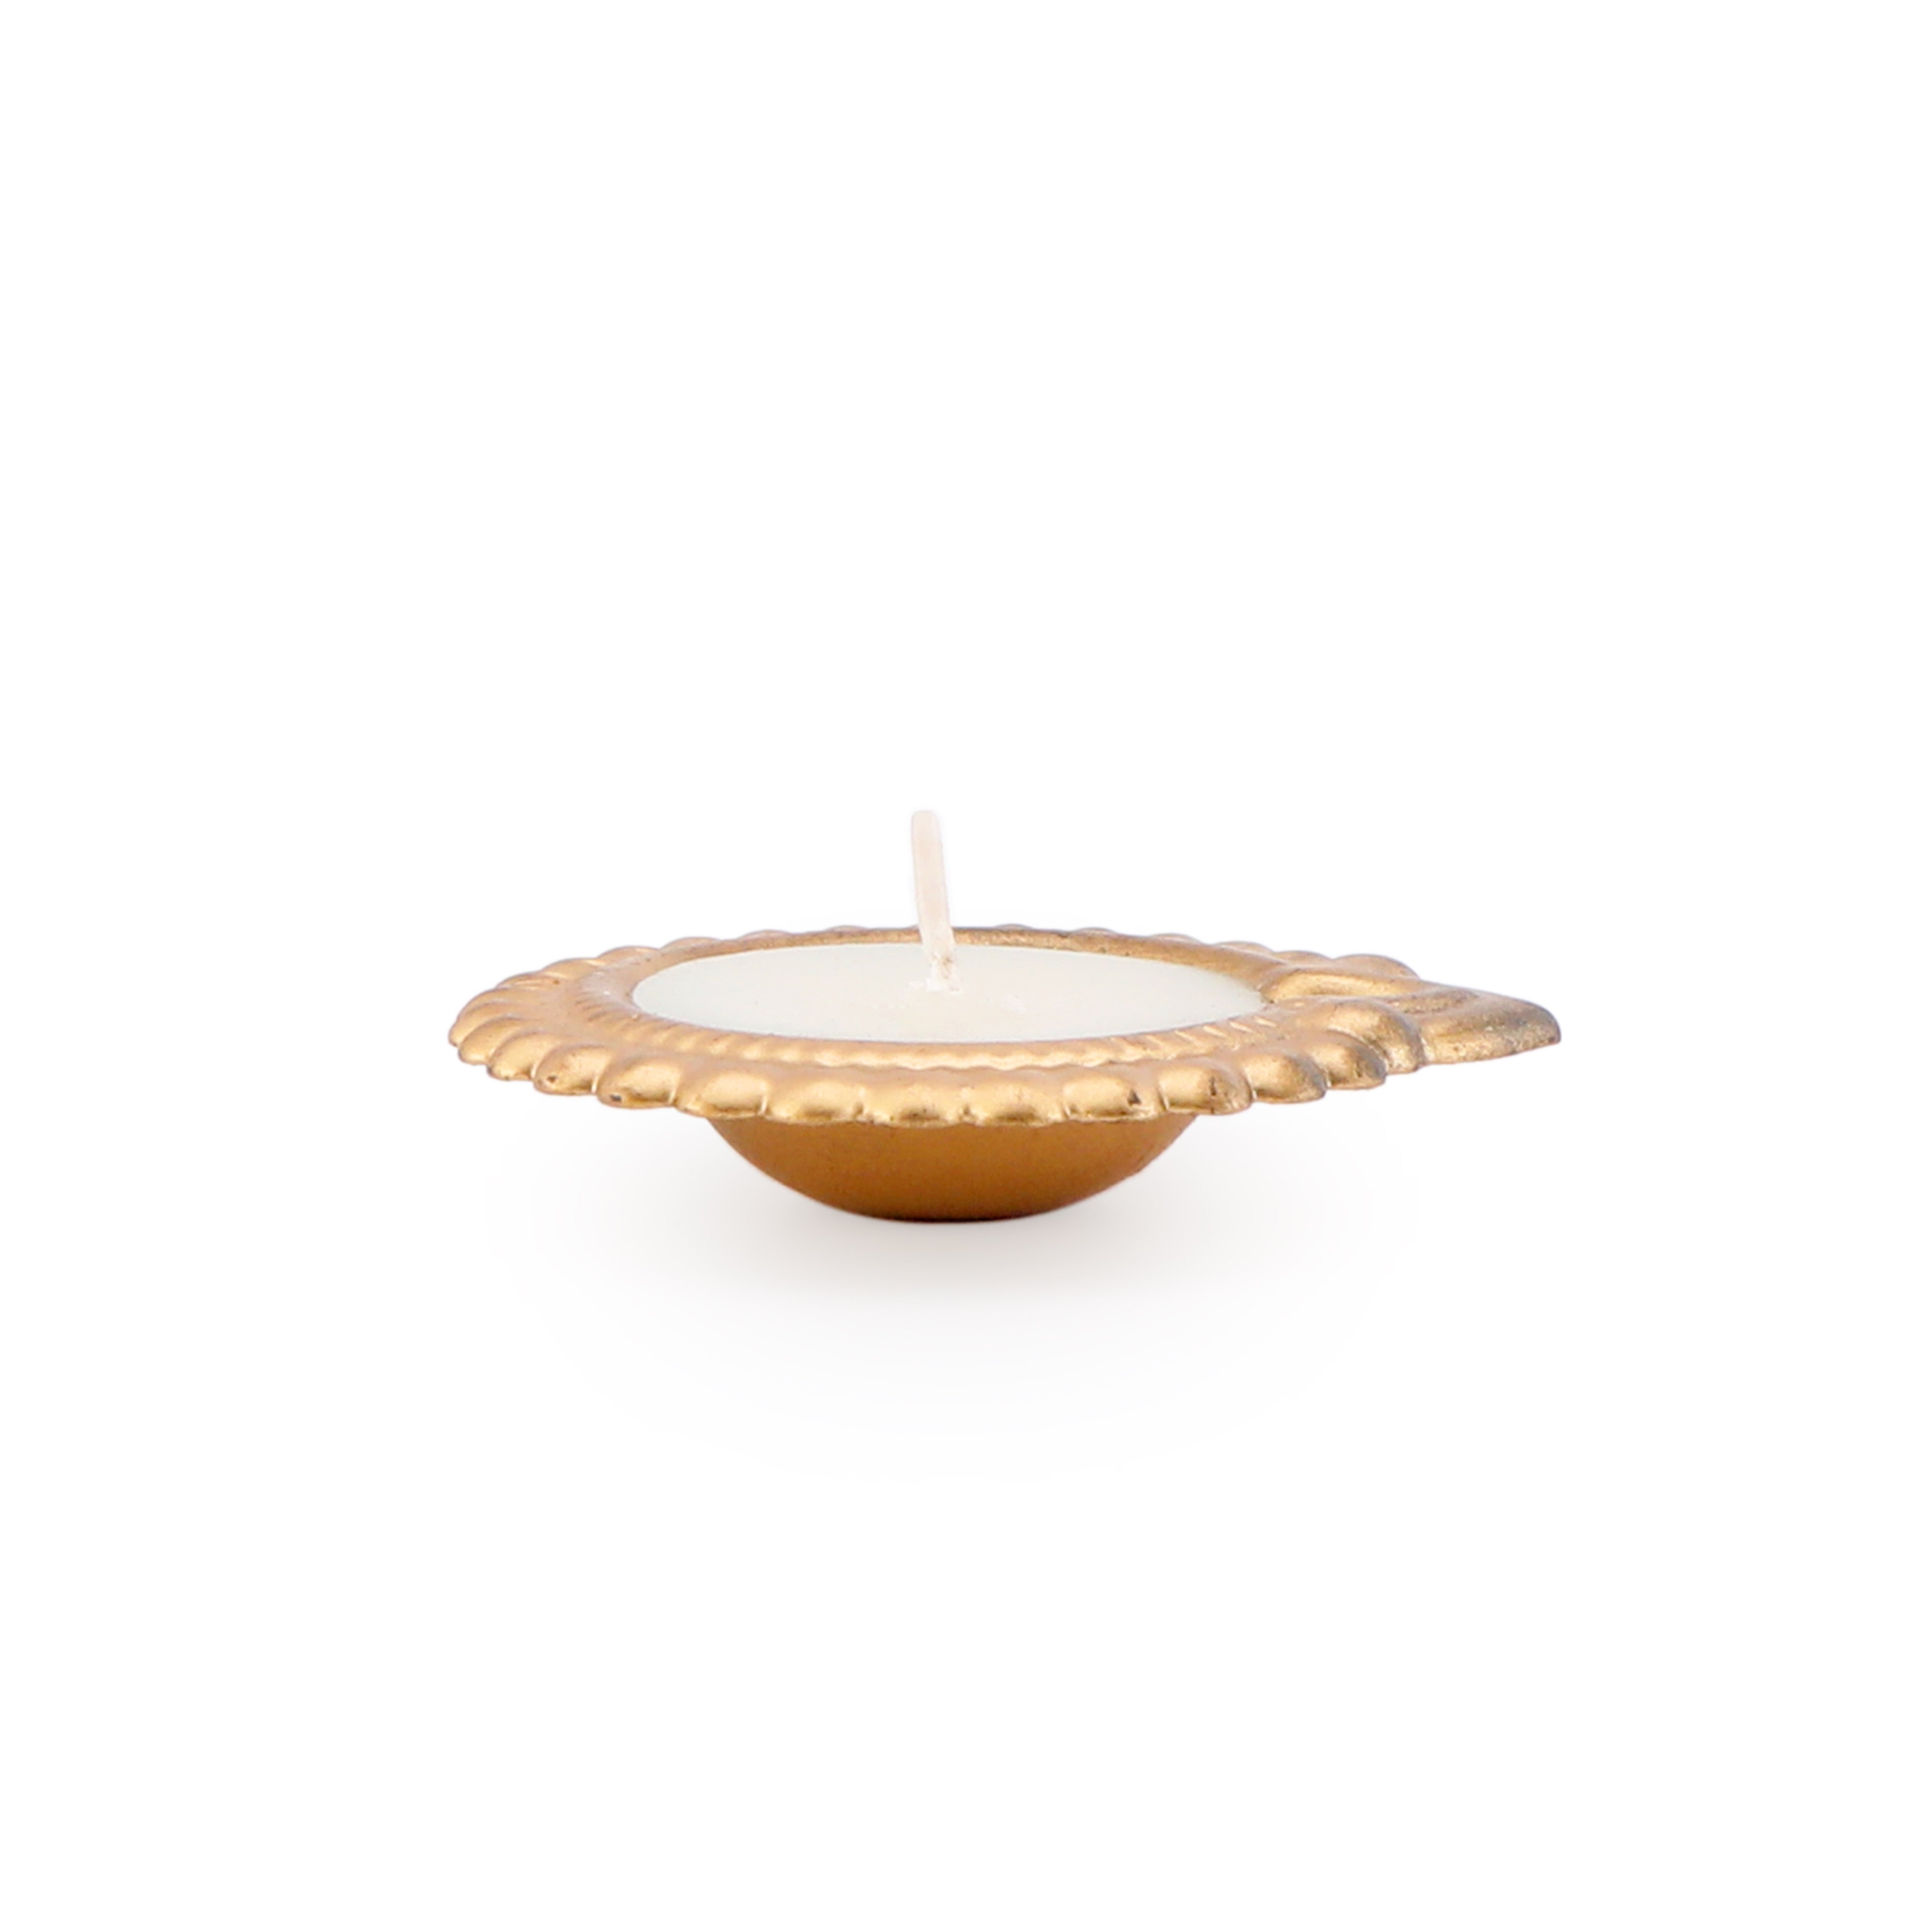 Diya - Gold & Copper Set of 6 Candle Holder 8- The Home Co.